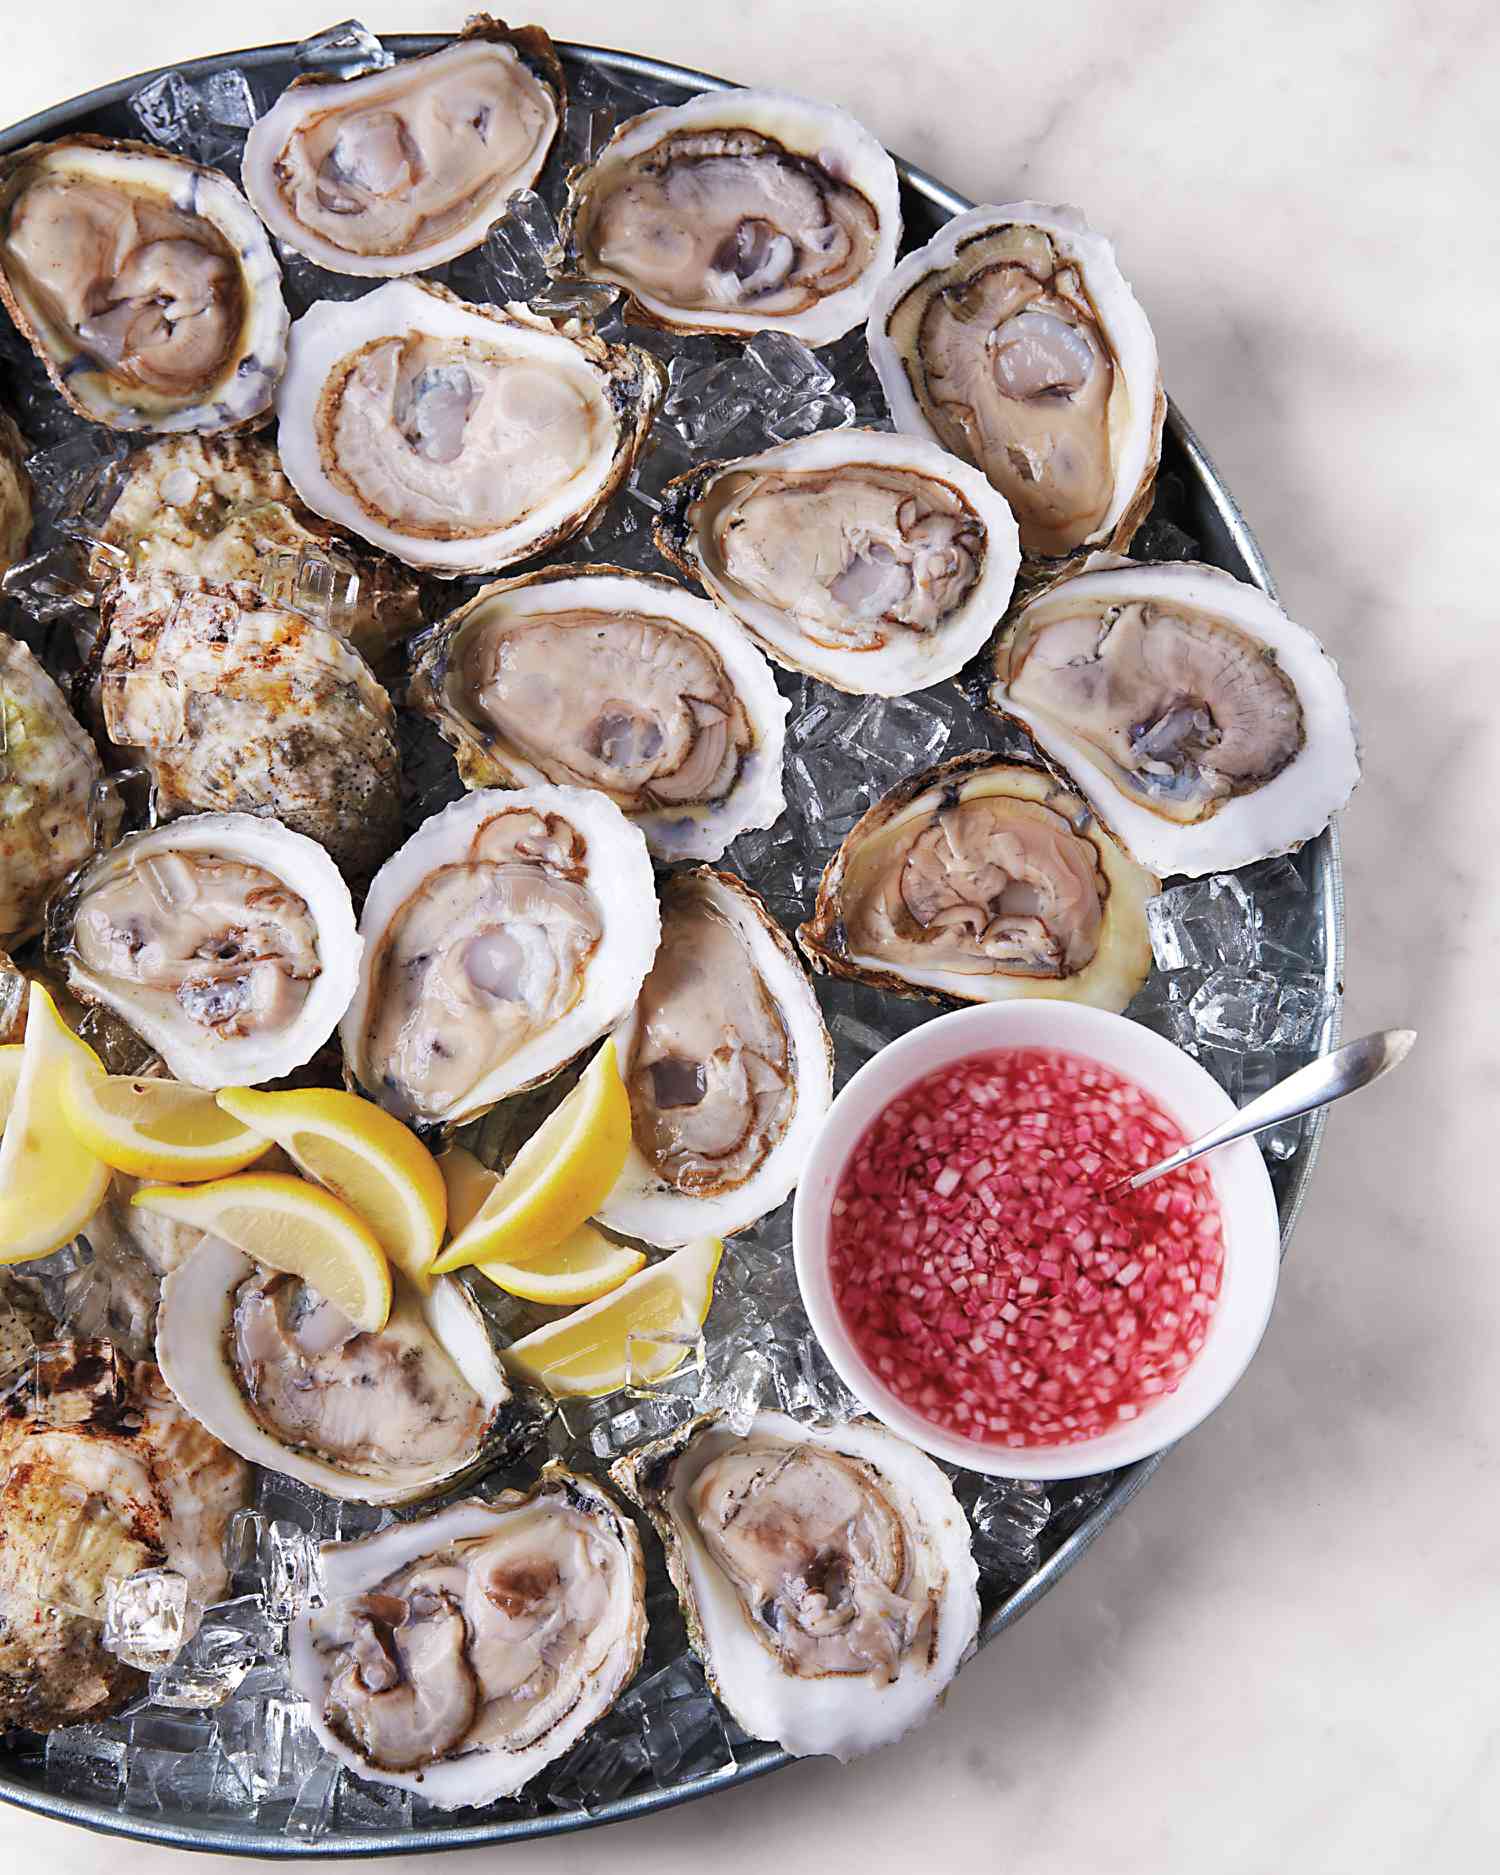 Why Oysters Could Be Good for Your Mental Health 